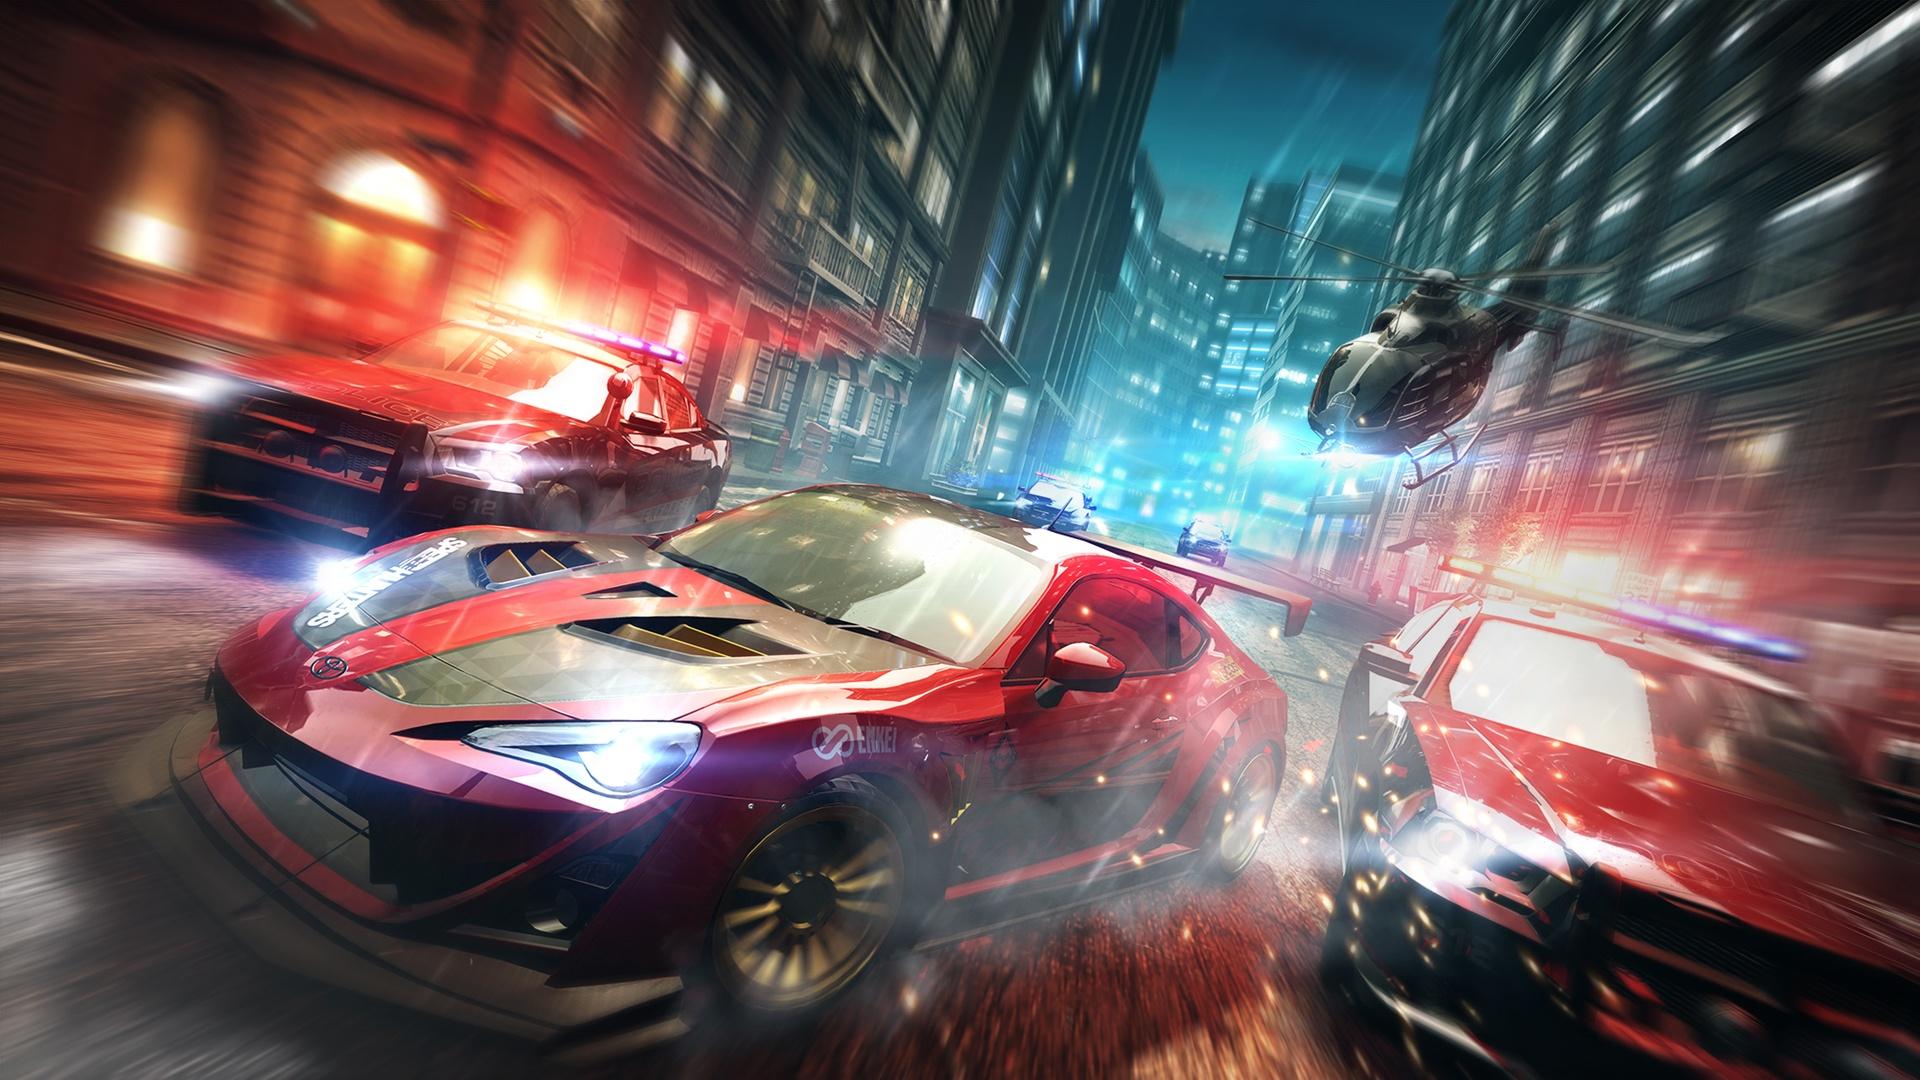 Need For Speed Heat Full Car List, Gameplay and Car